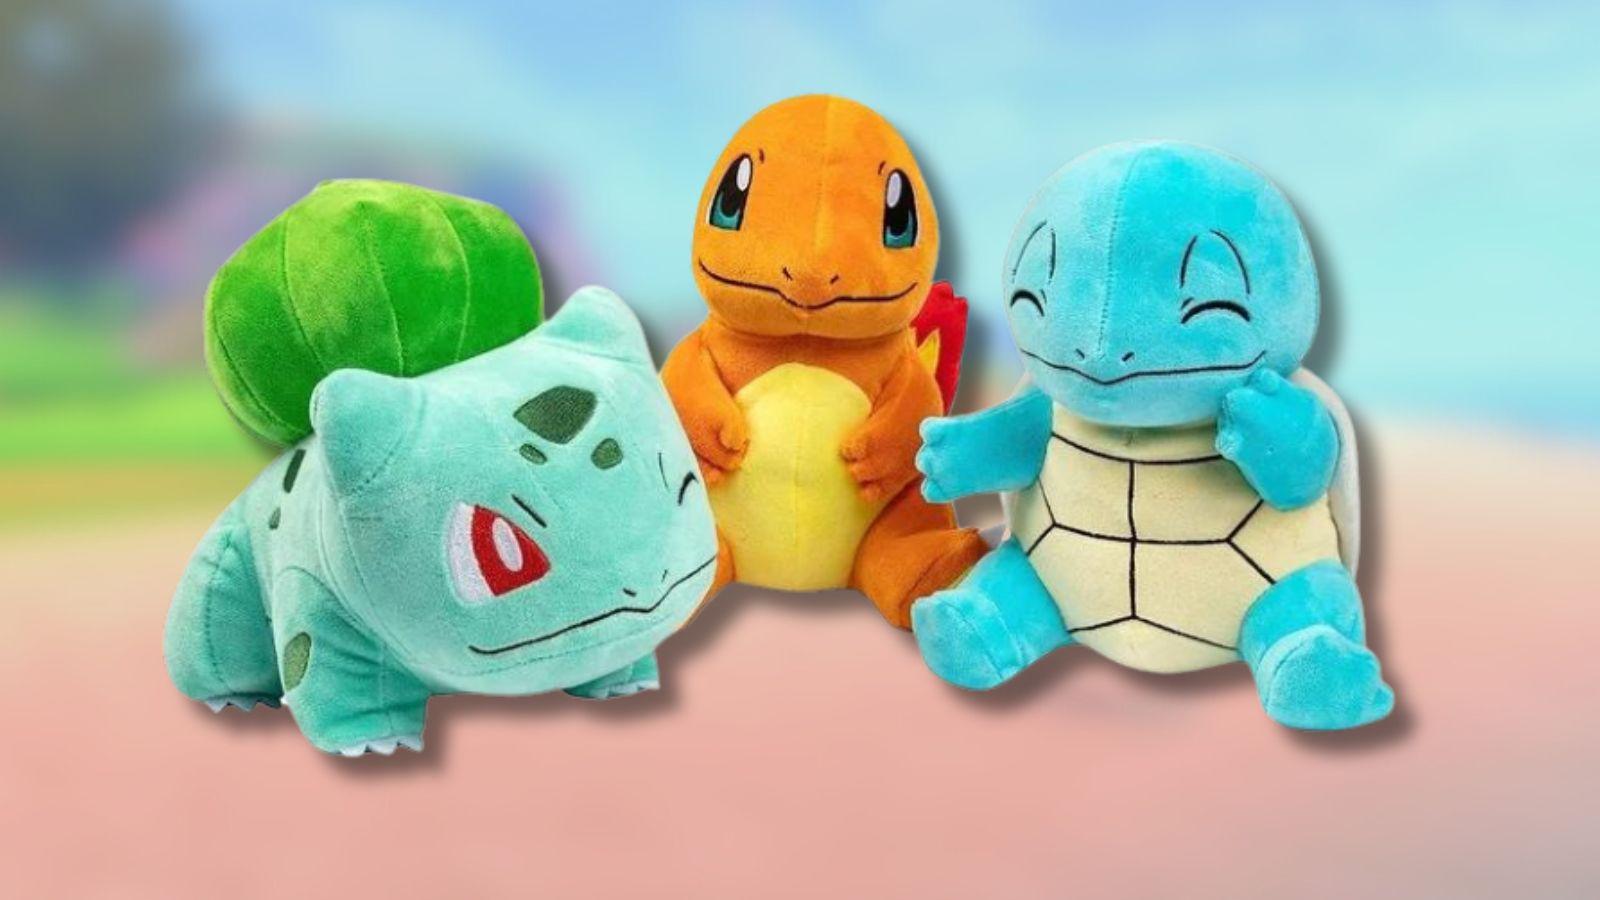 Pokemon trio of plushes with game background.